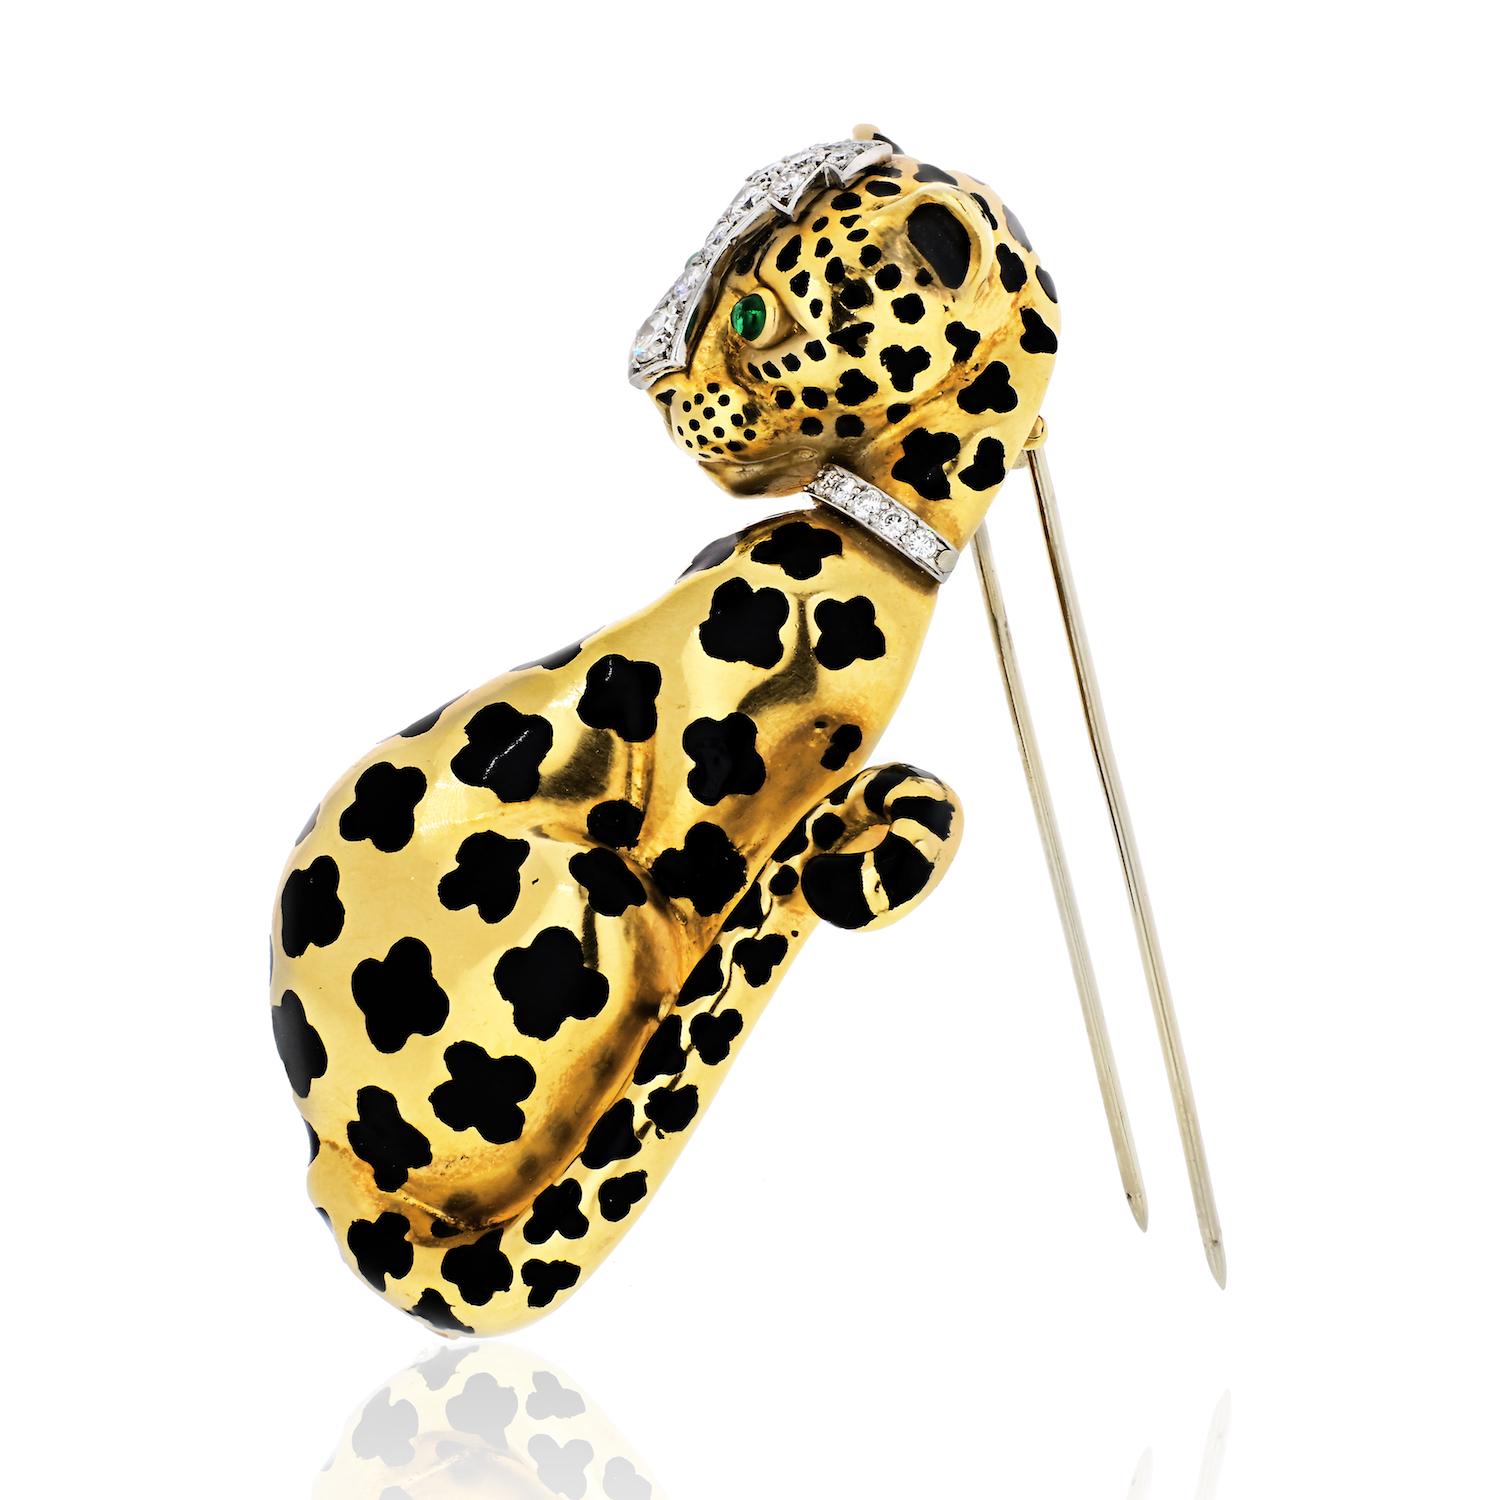 Recognizable and iconic this David Webb Leopard Brooch is crafted in 18 Karat Yellow Gold, set with round Diamonds, Emerald eyes, and black enamel. 

Sweet and romantic this Leopard brooch will start conversations the moment you put it on.